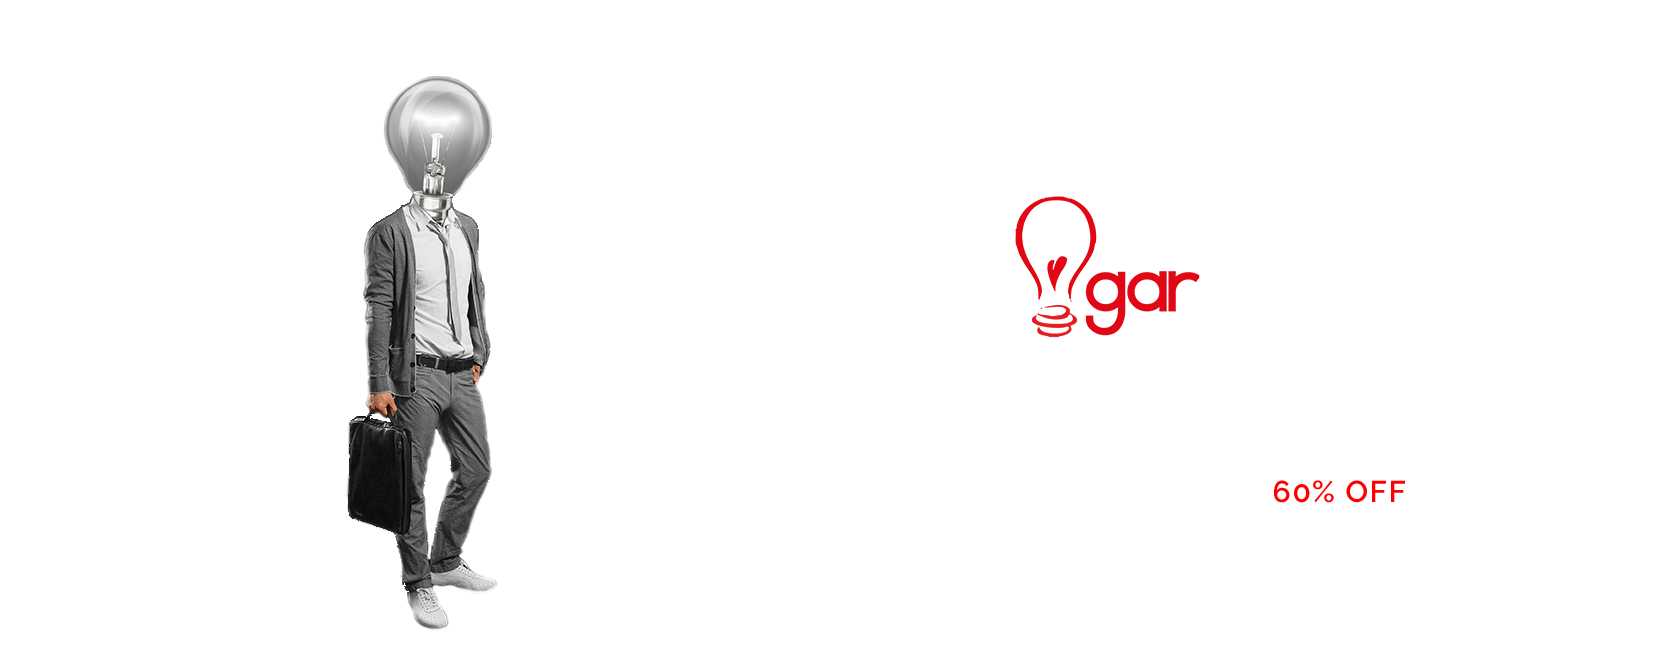 garMedia - youll love our ideas